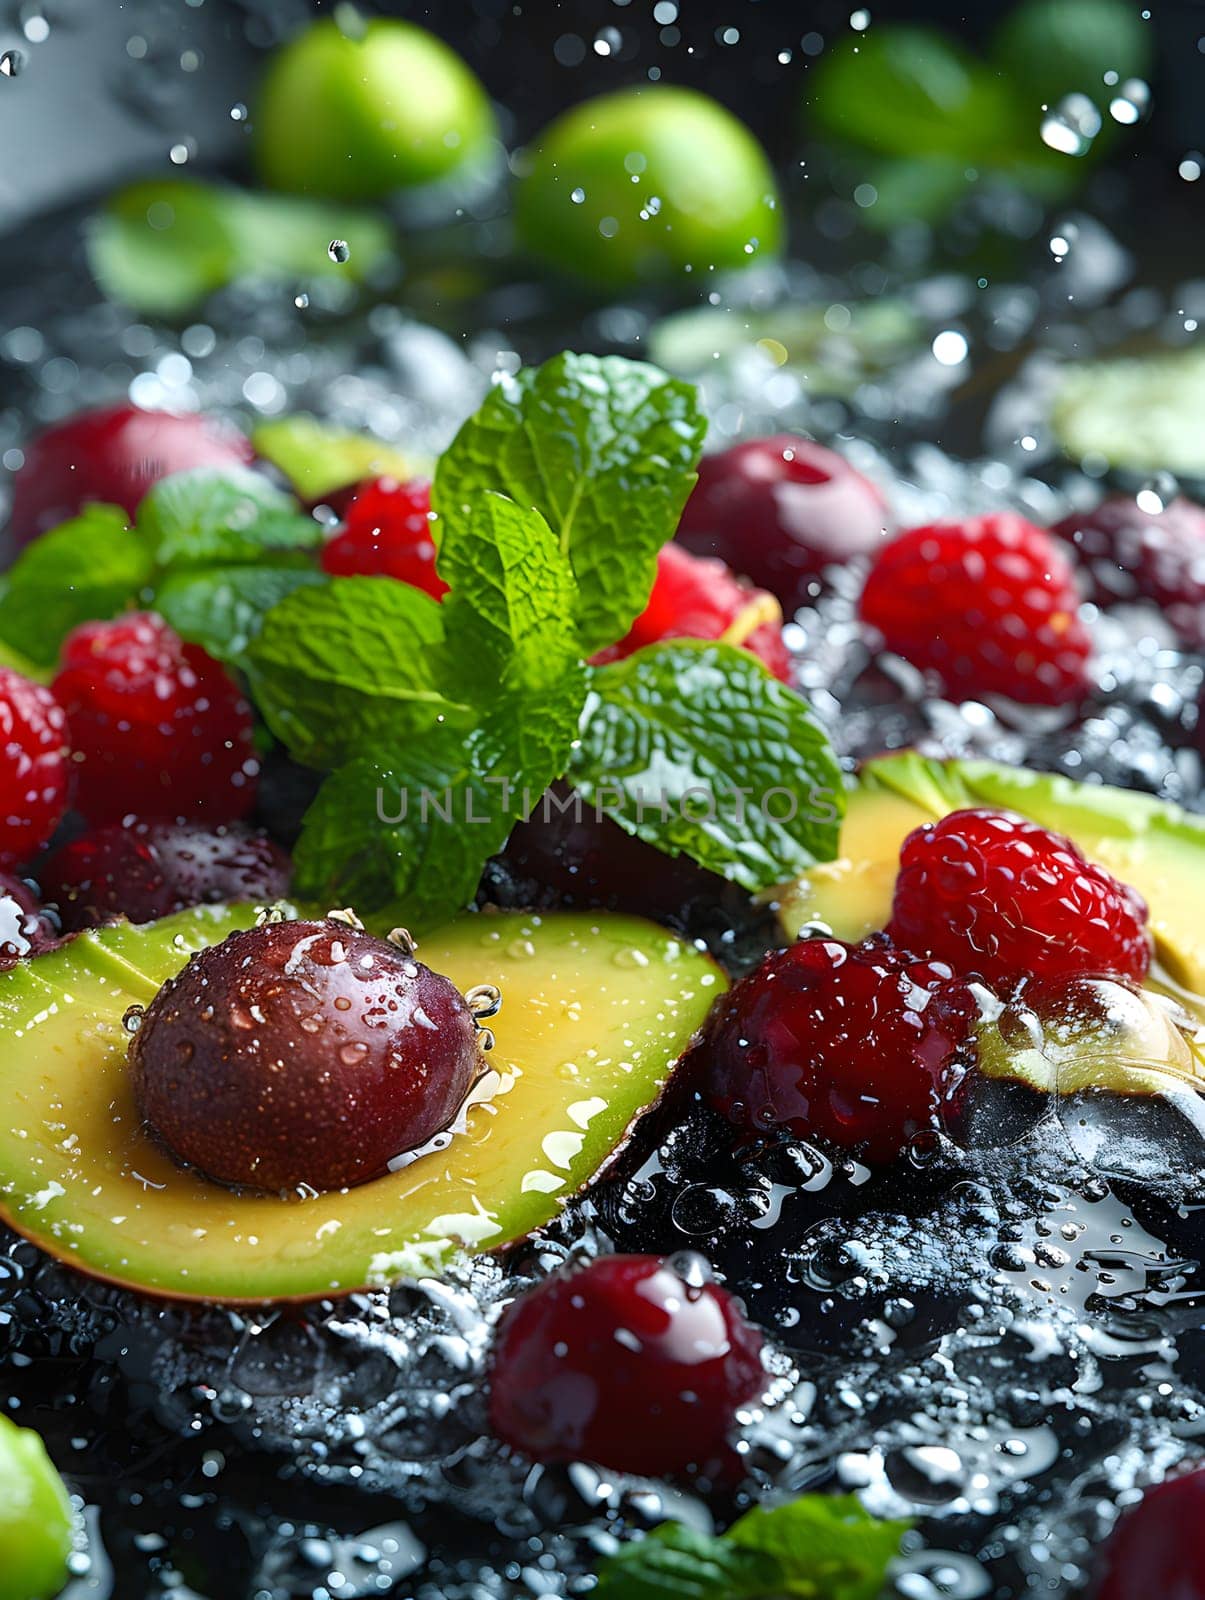 A closeup shot showcasing a slice of avocado surrounded by fresh raspberries and mint leaves, creating a vibrant and appetizing display of natural foods